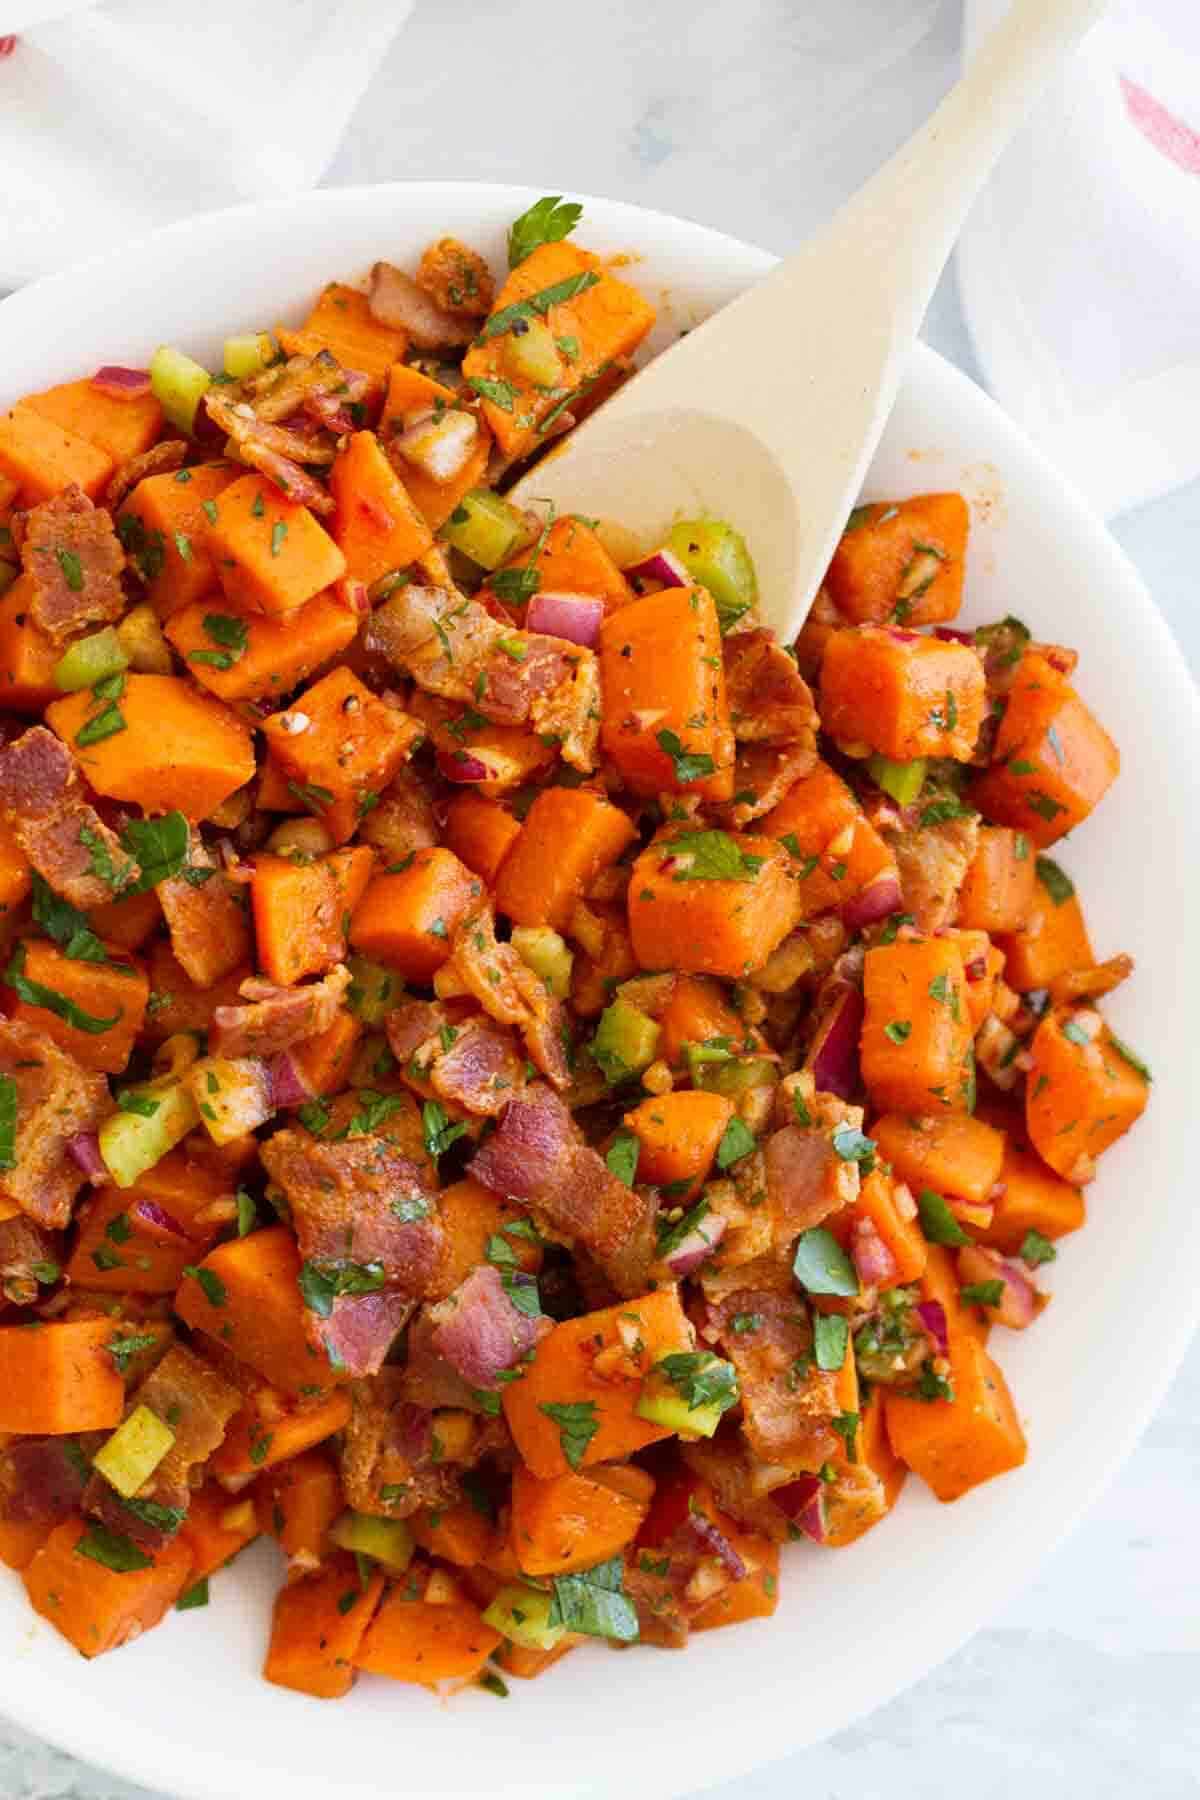 Potato salad made from sweet potatoes and bacon.